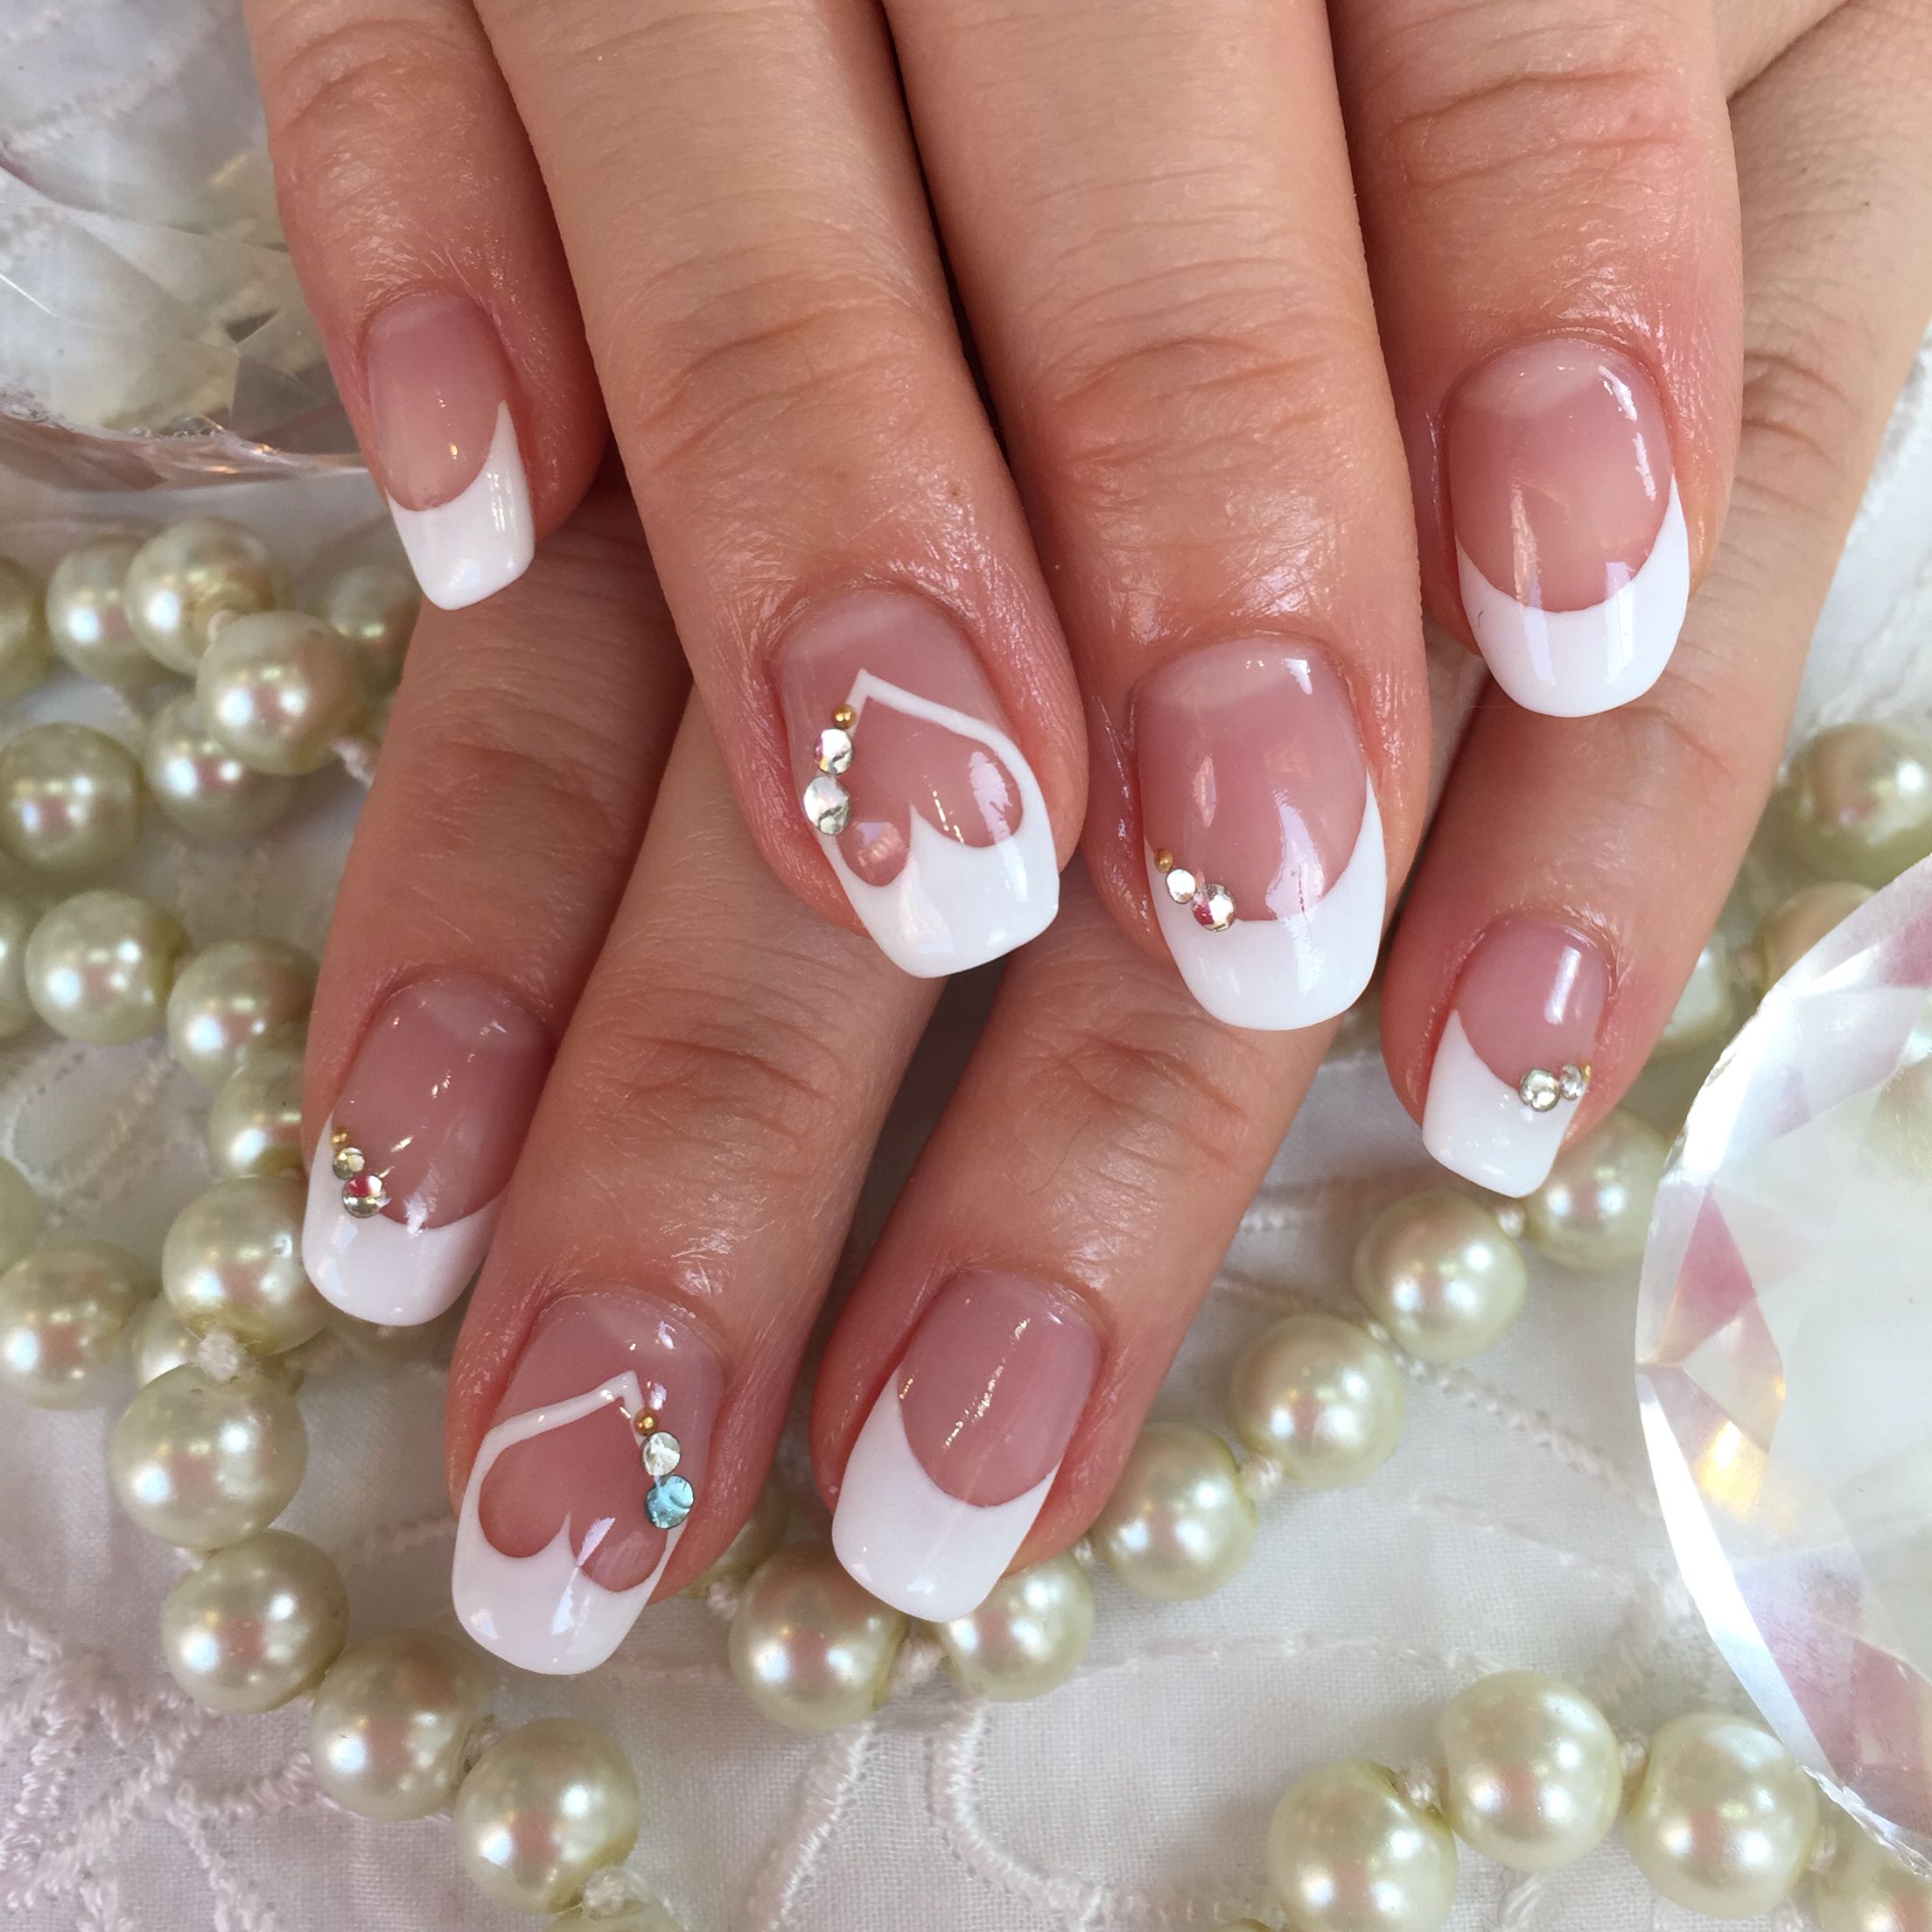 49 Wedding Nails Ideas For Every Bride From Frenchies To Dinky Details   Glamour UK